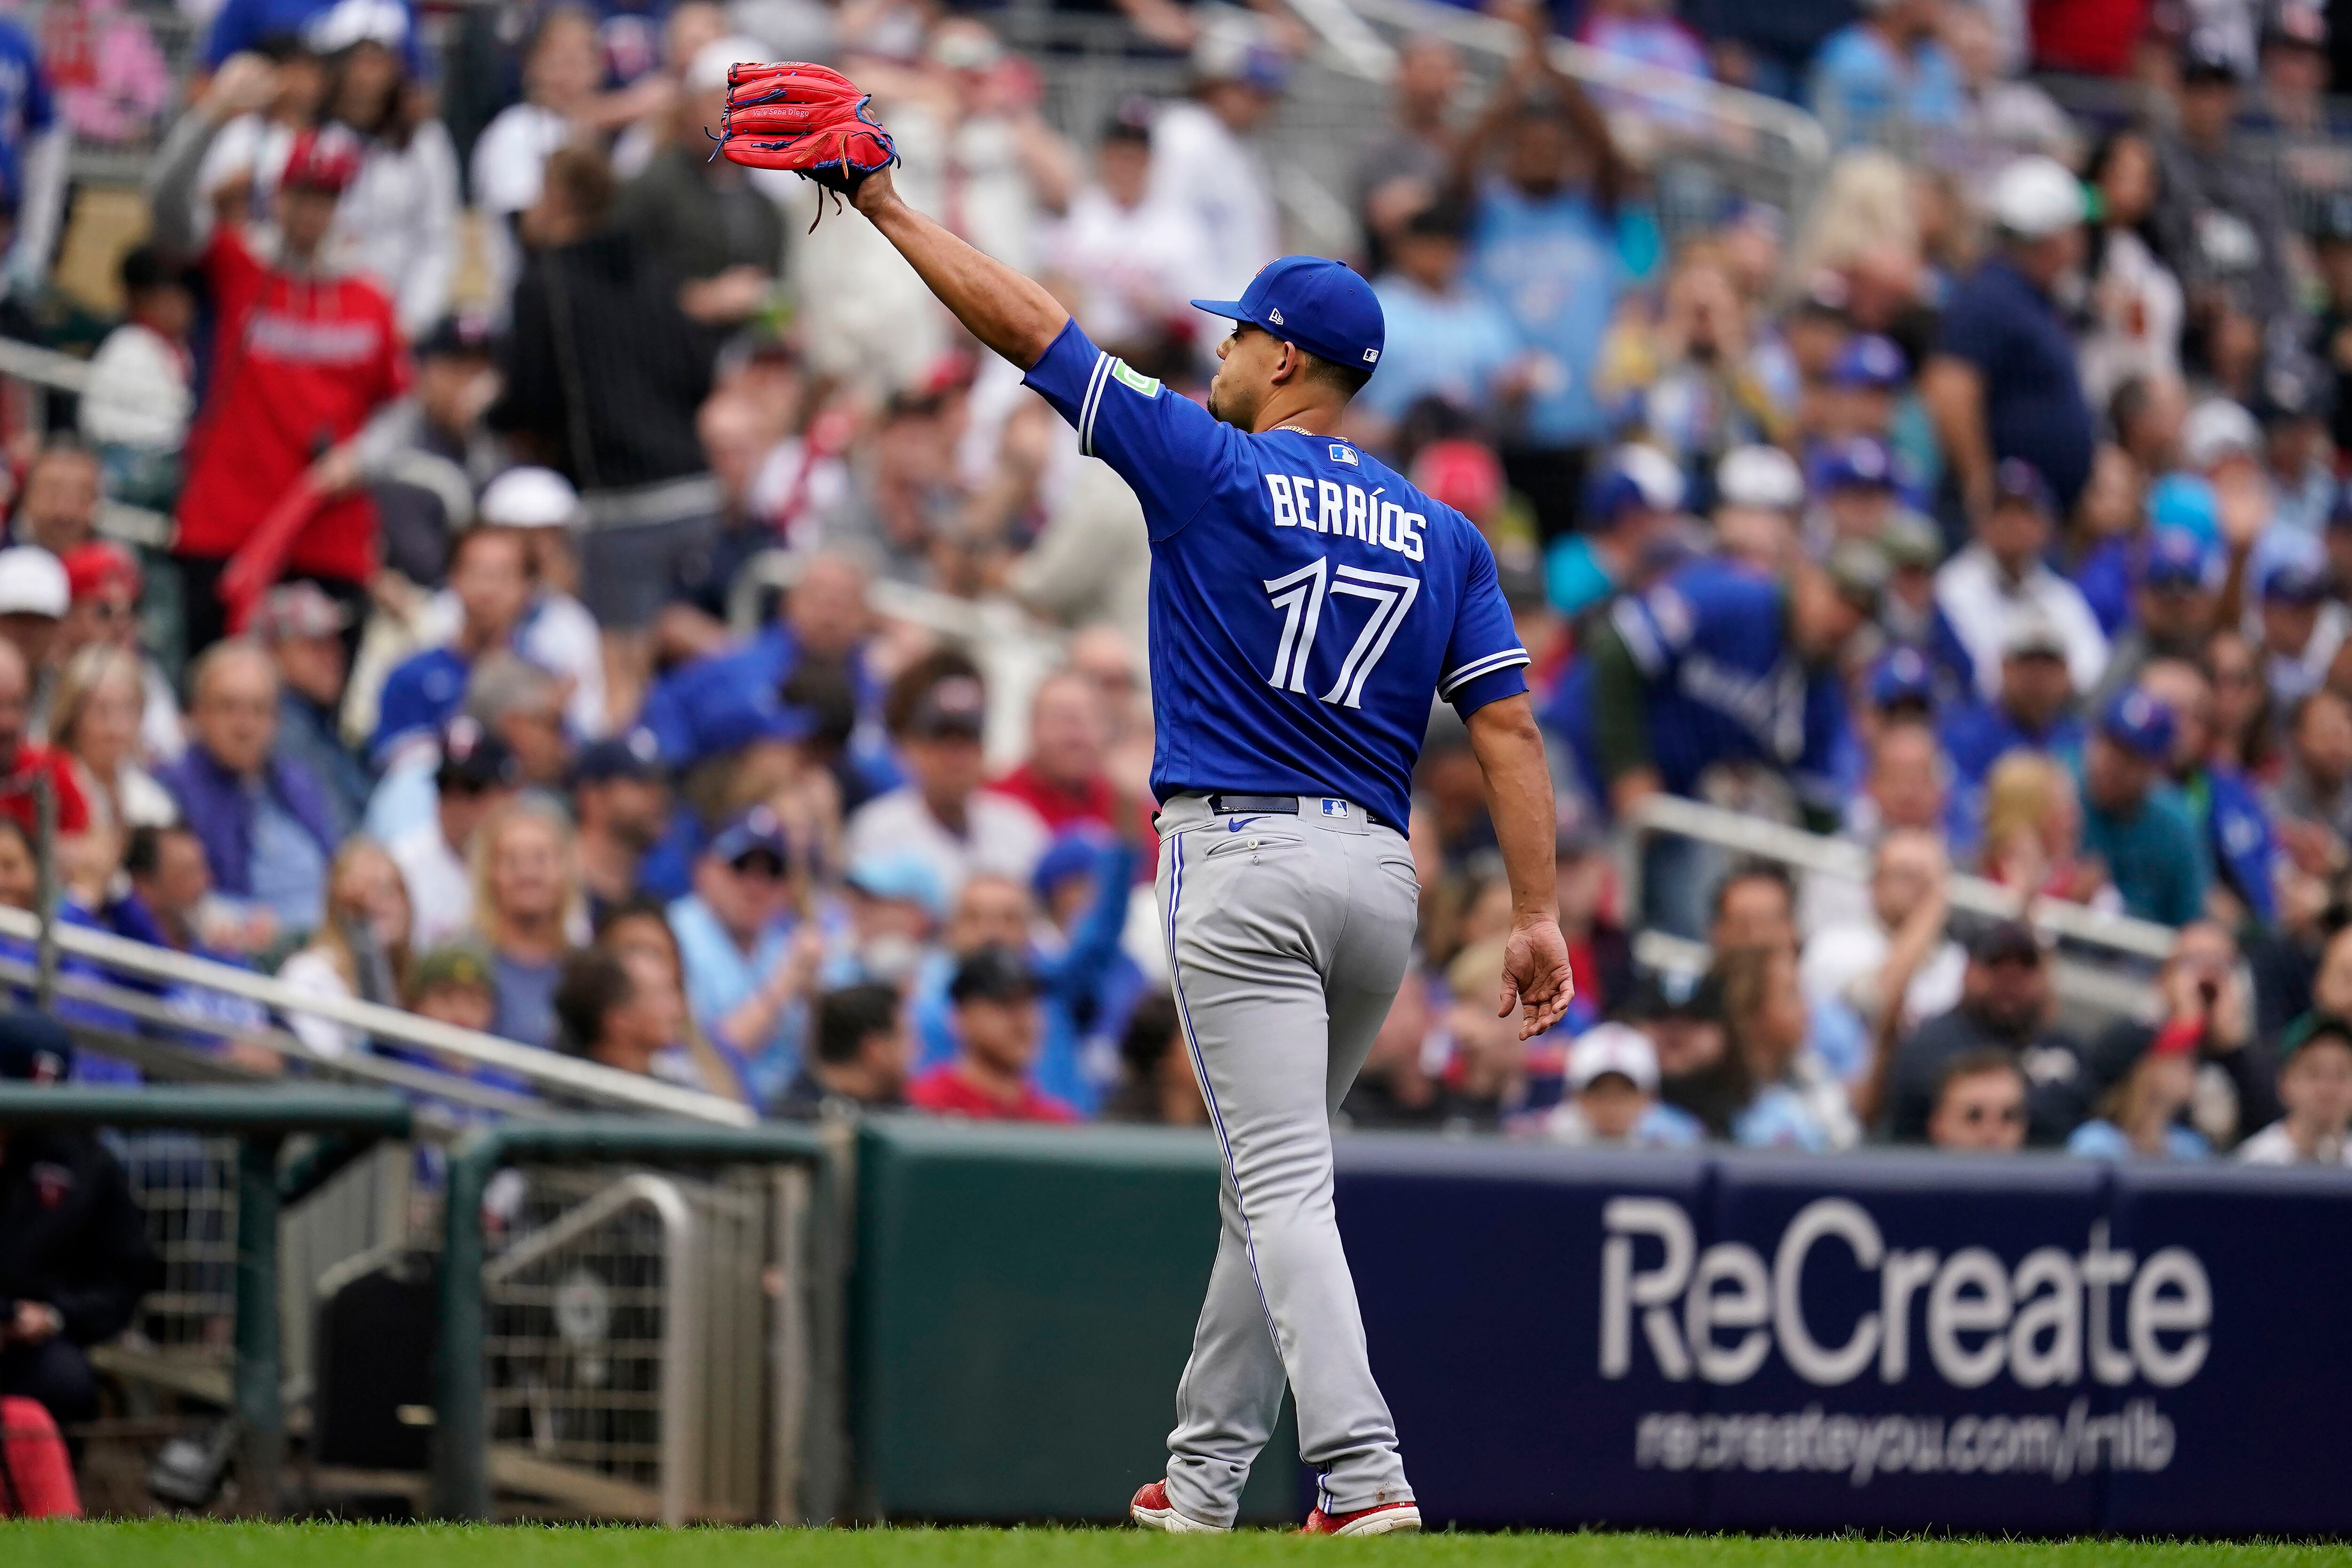 Berrios makes quality start as Blue Jays edge Astros for 9th win